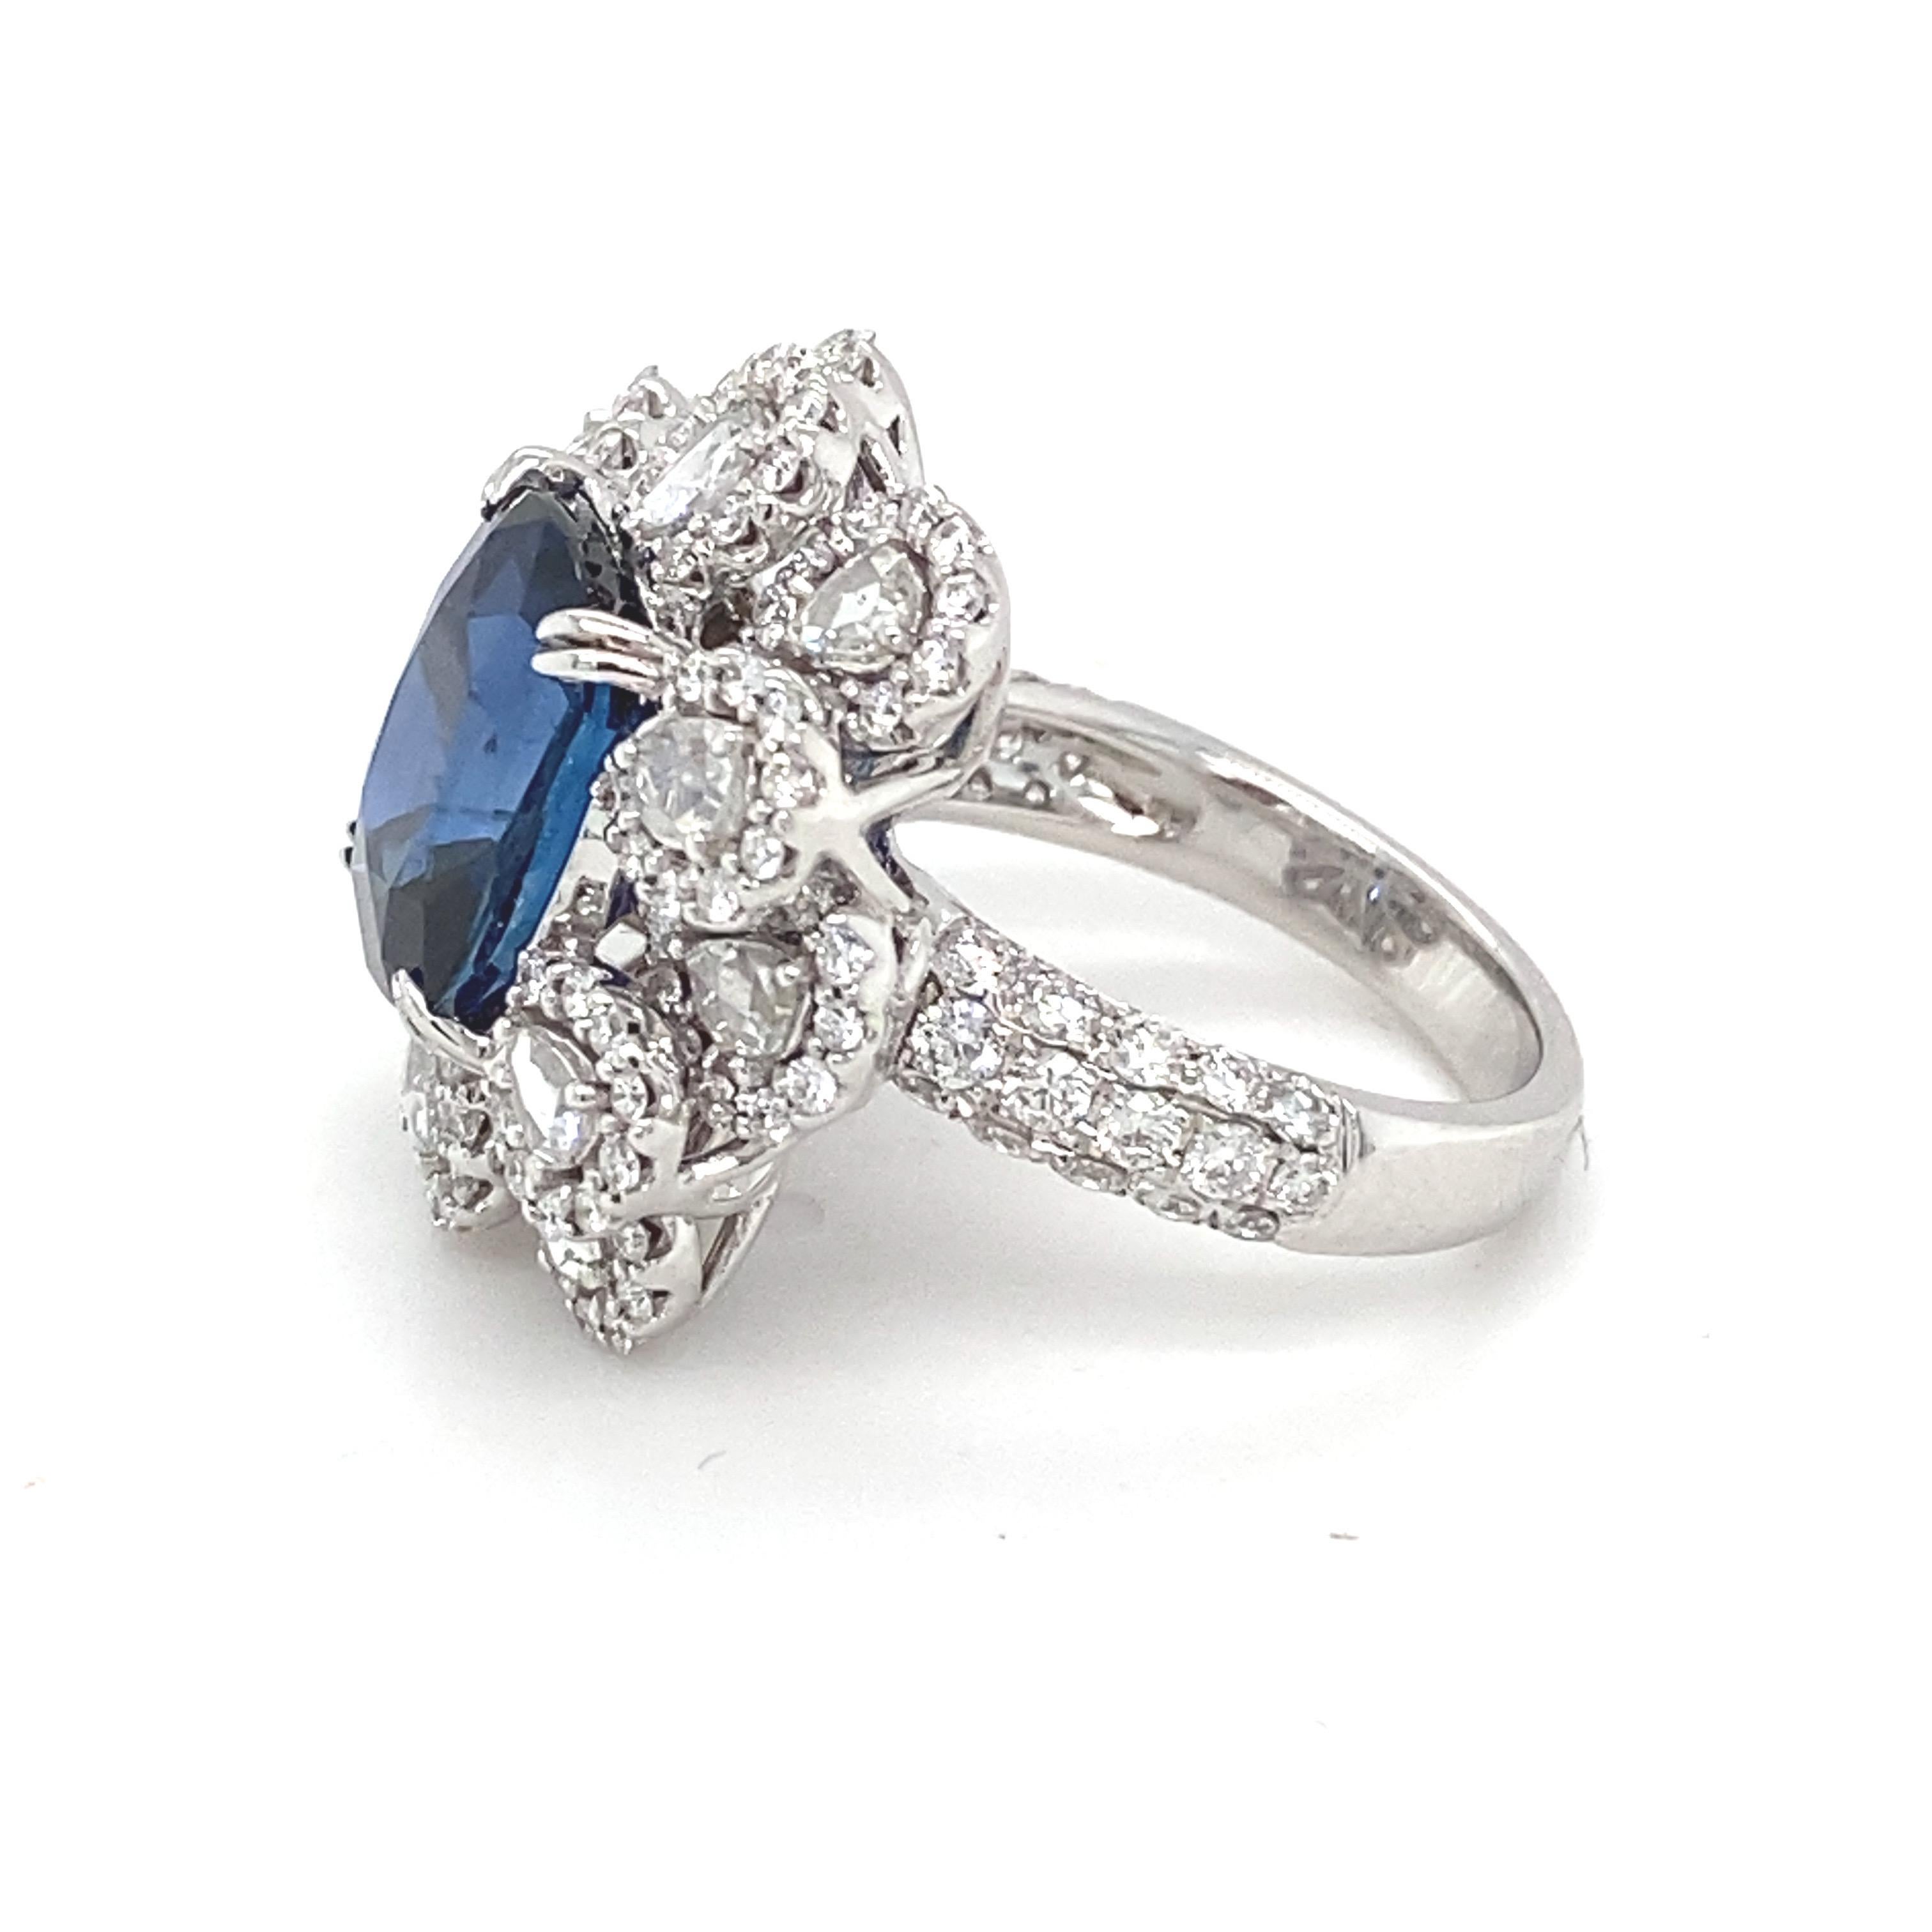 GIA Certified 7.87 Carat Cushion Shape Blue Sapphire Diamond 18K Engagement Ring For Sale 8